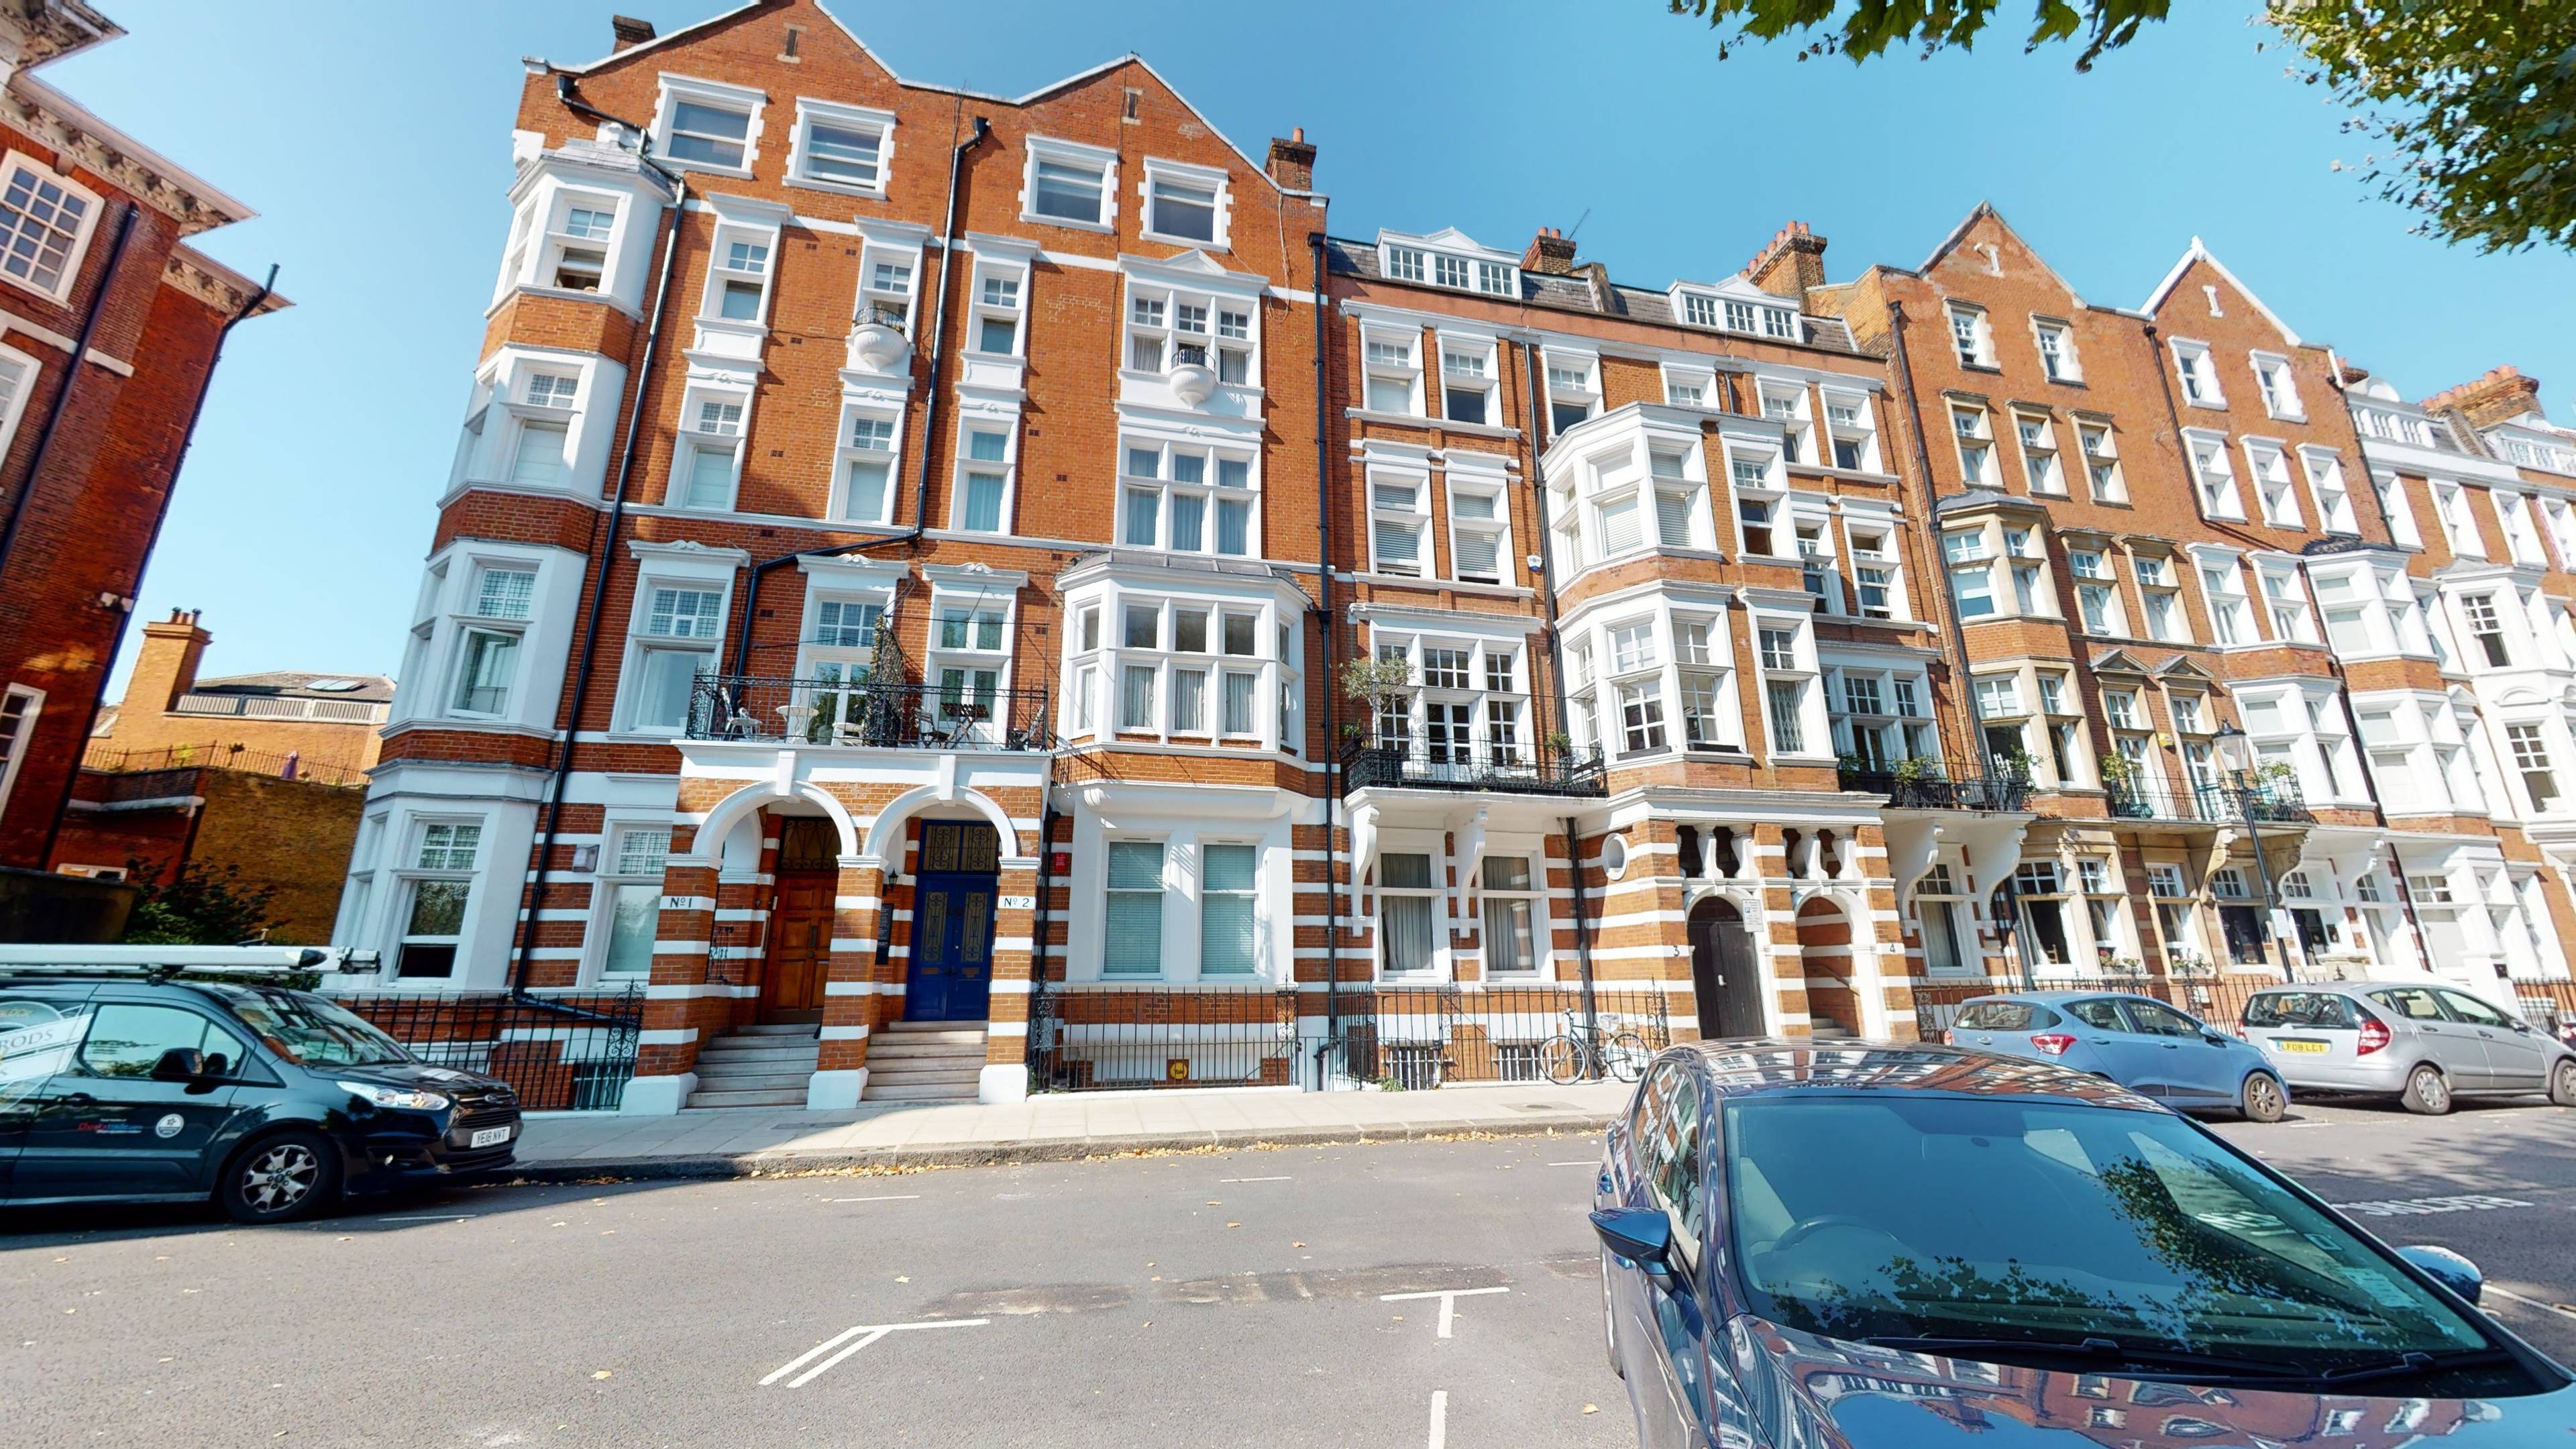 Short lease studio apartment with separate kitchen and bathroom with mezzanine level, in a highly desirable location opposite Chelsea Embankment.